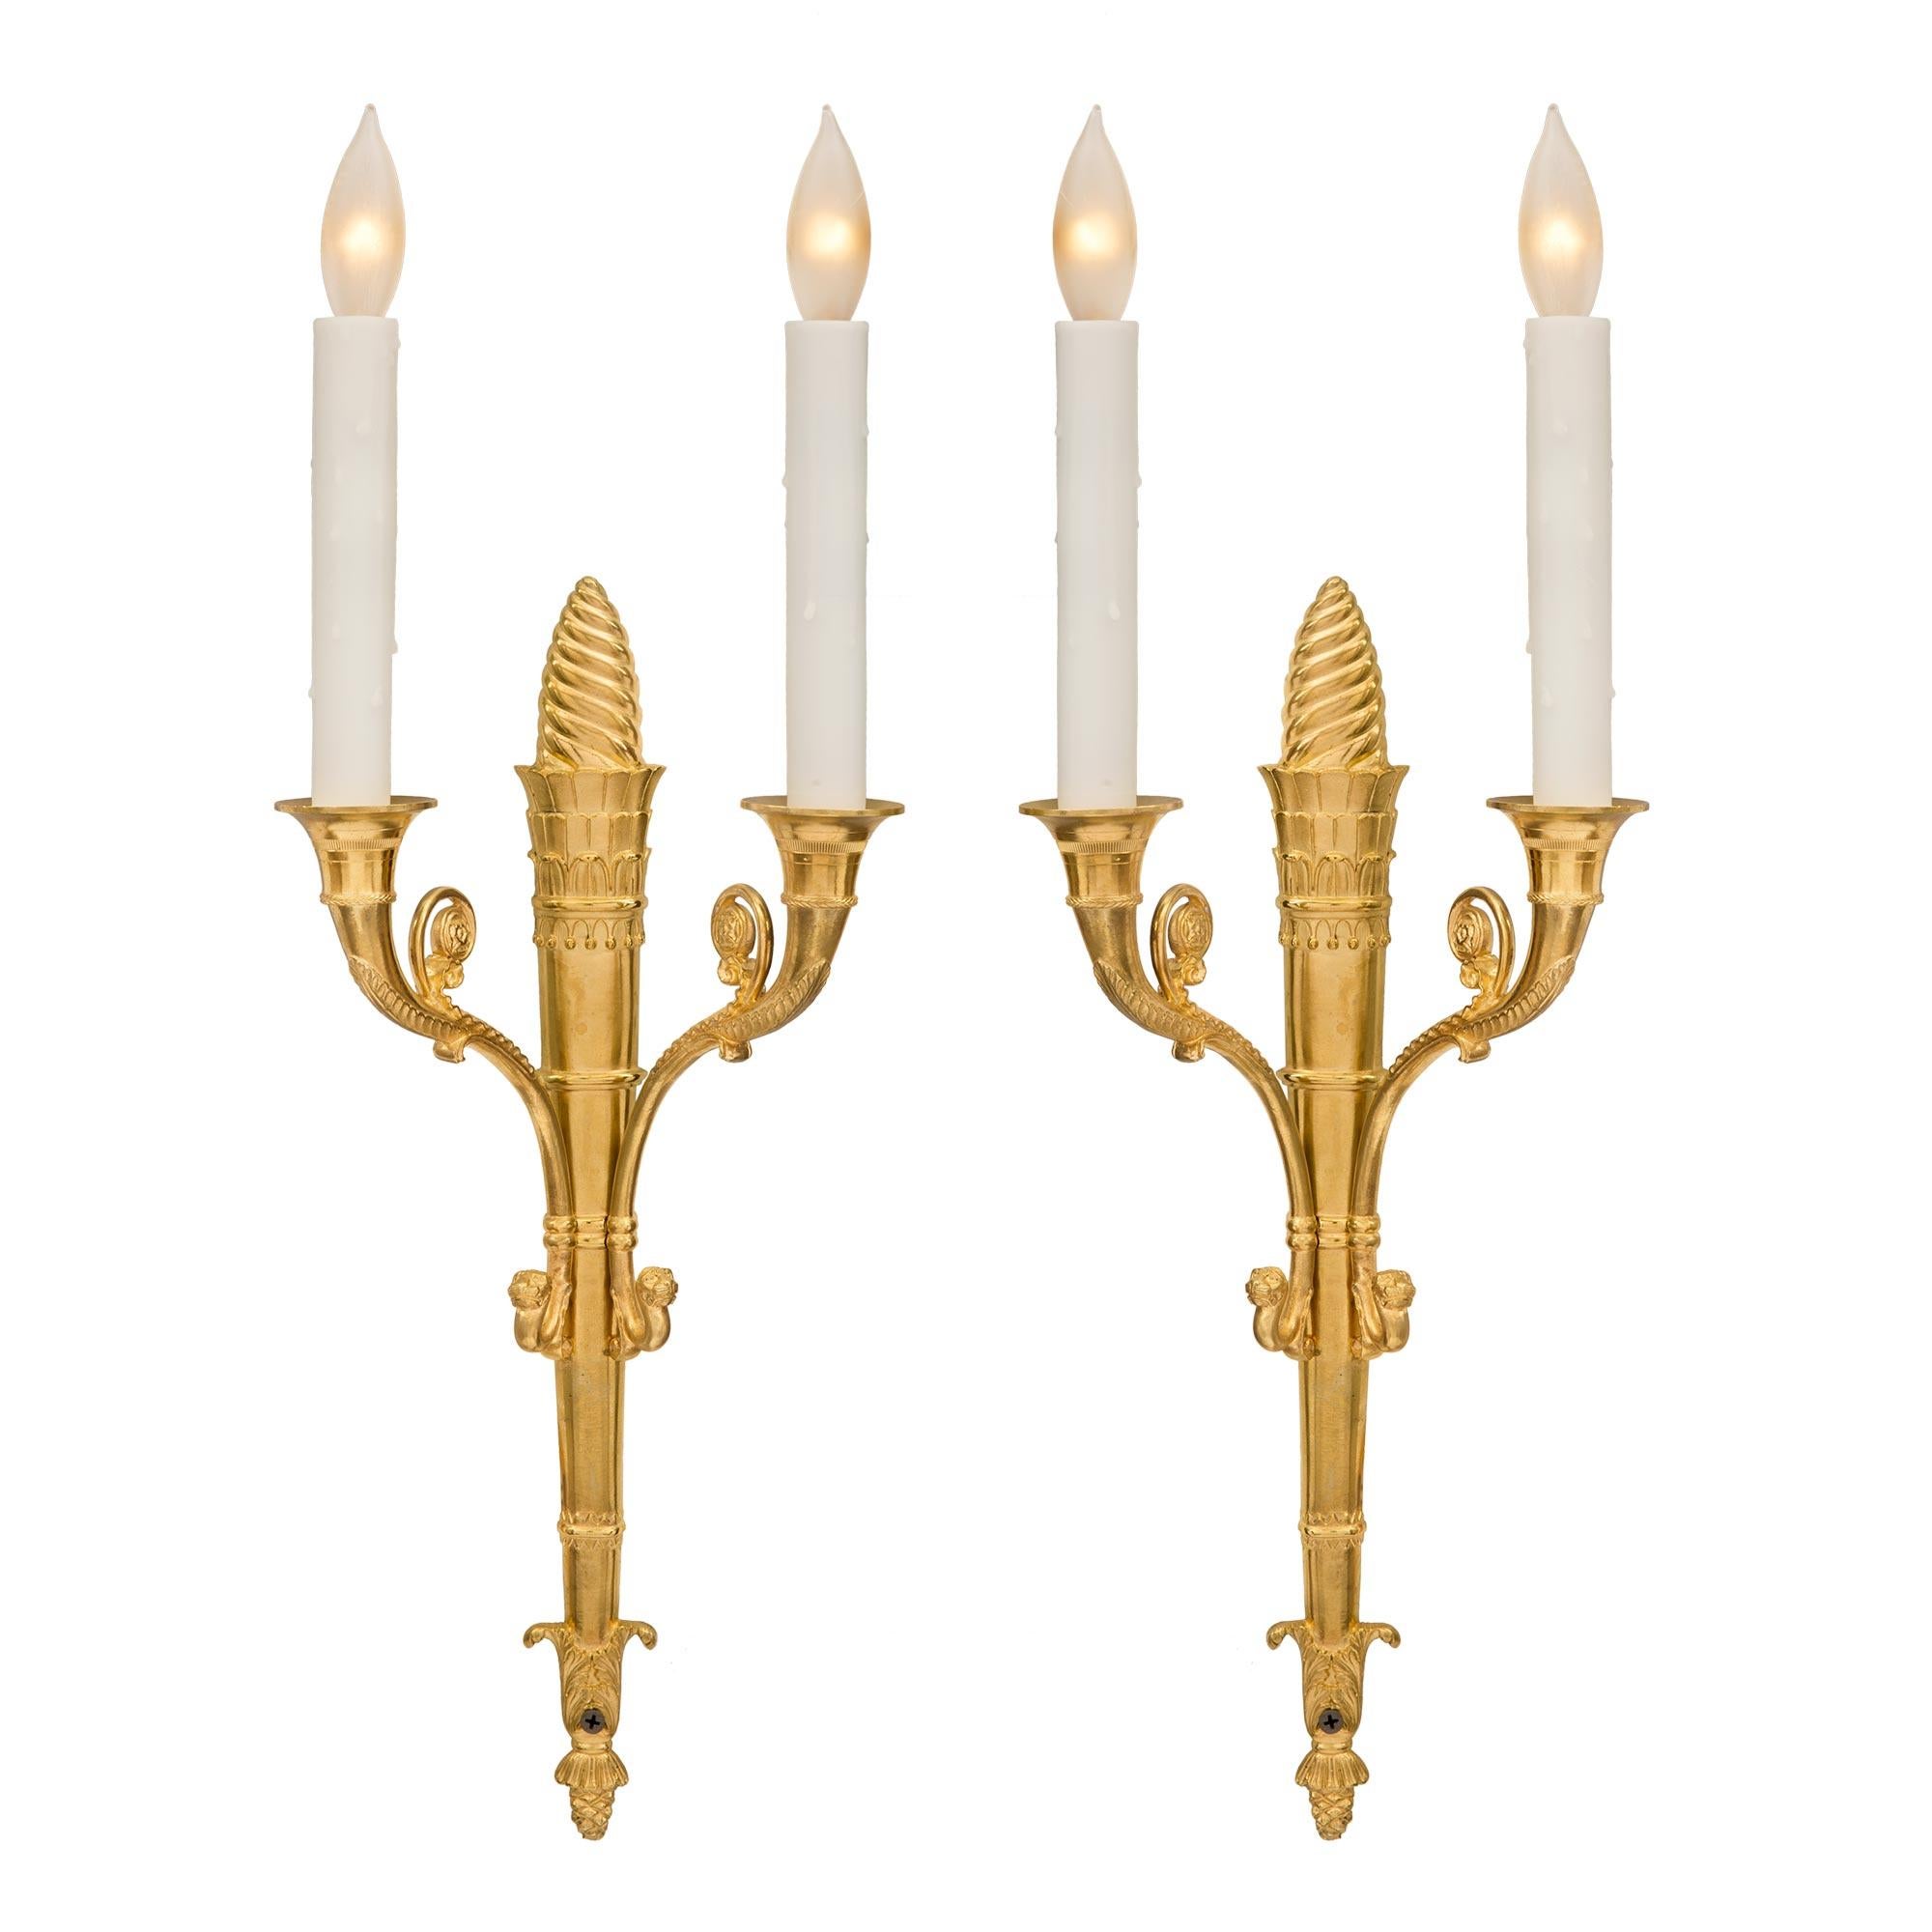 An elegant pair of French 19th century neoclassical two-arm ormolu sconces. Each sconce is centered by a fine bottom acorn finial adorned with acanthus leaves. The tapered central fut is in the shape of a quiver and displays a striking spiraled top